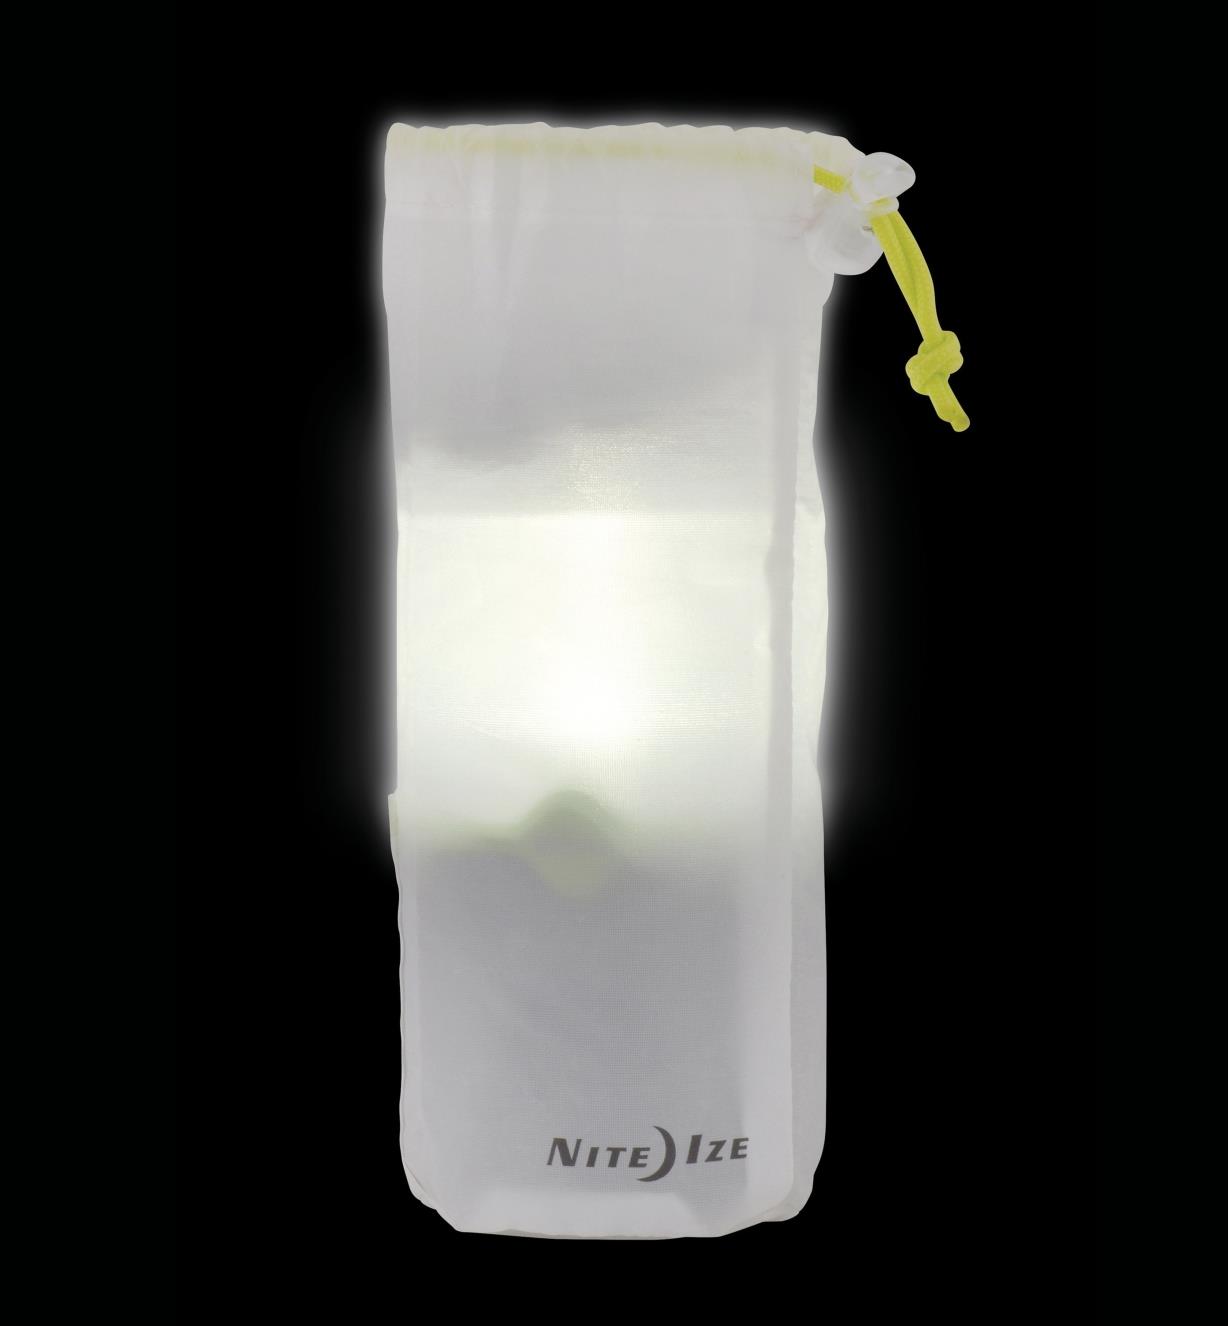 A translucent carrying bag with a drawstring holds the lantern